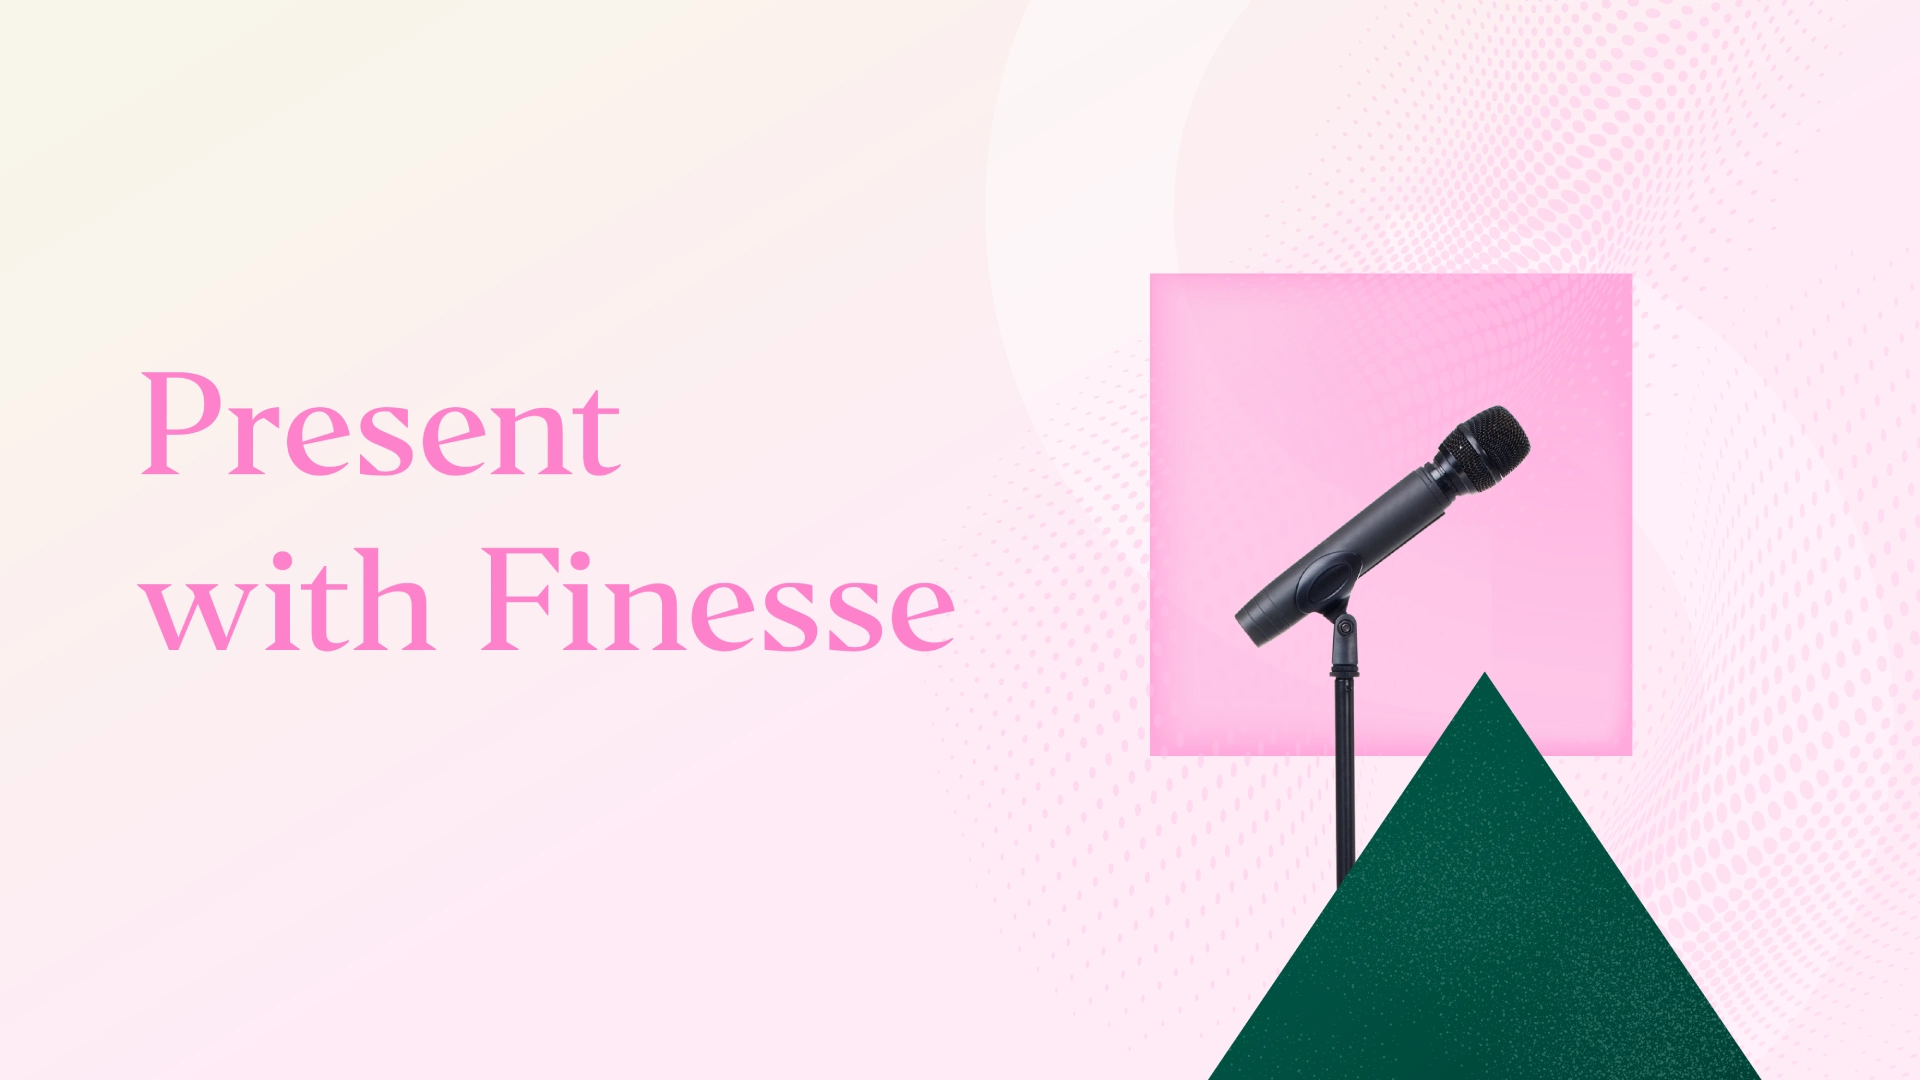 Present with Finesse: Conference Tips for Presentations by Create Forward Design